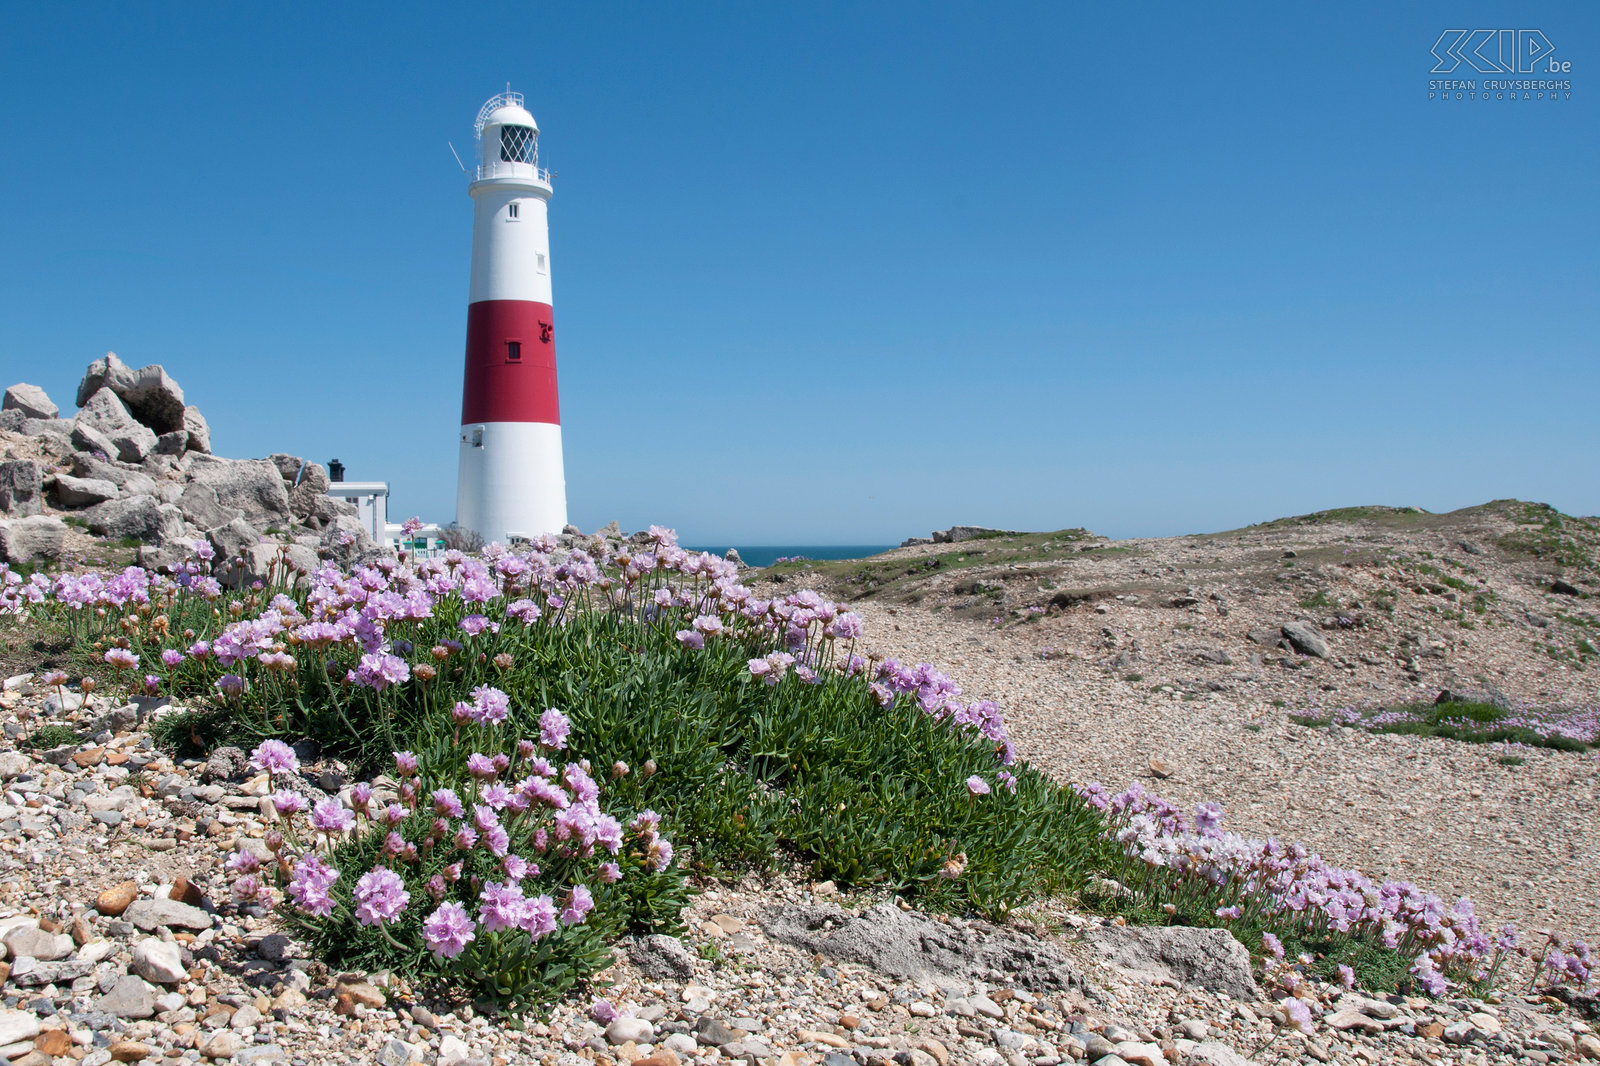 Portland Bill Lighthouse The beautiful white and red striped Portland Bill lighthouse in the Isle of Portland in southern Dorset. It was built in 1906. Stefan Cruysberghs